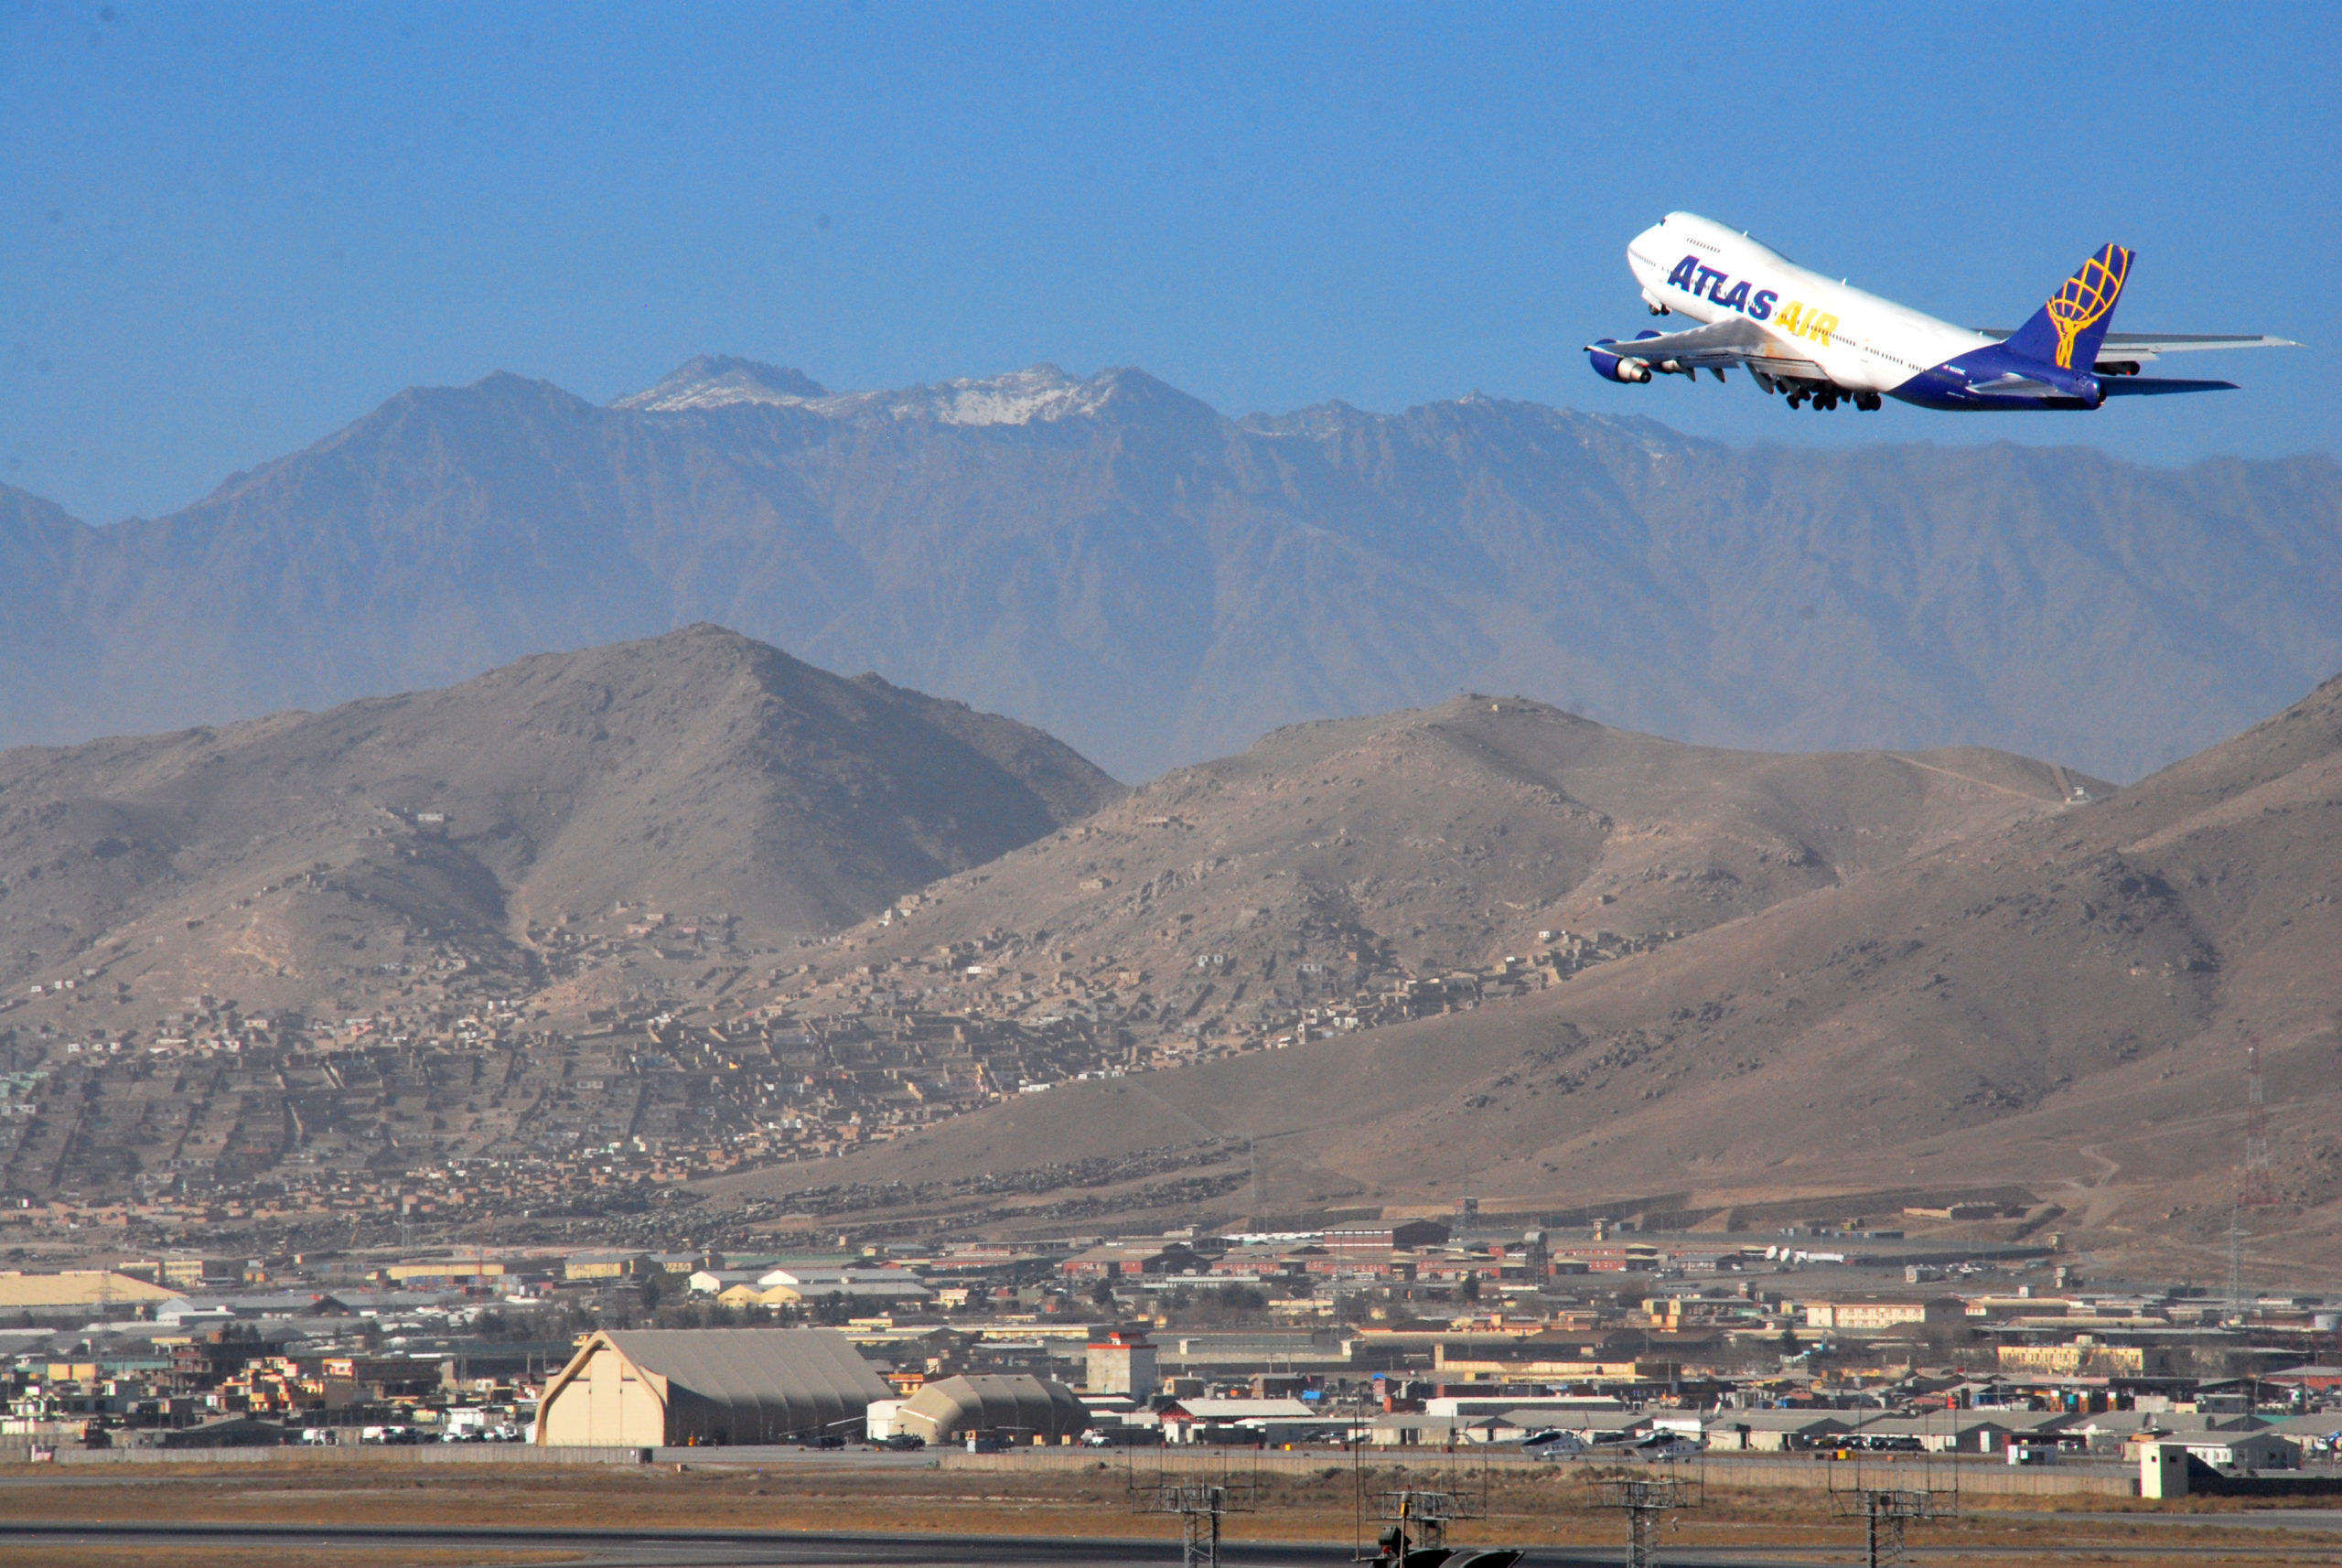 A World Atlas Boeing 747 aircraft takes off from Kabul international Airport, Kabul, Afghanistan, Dec. 13, 2010.